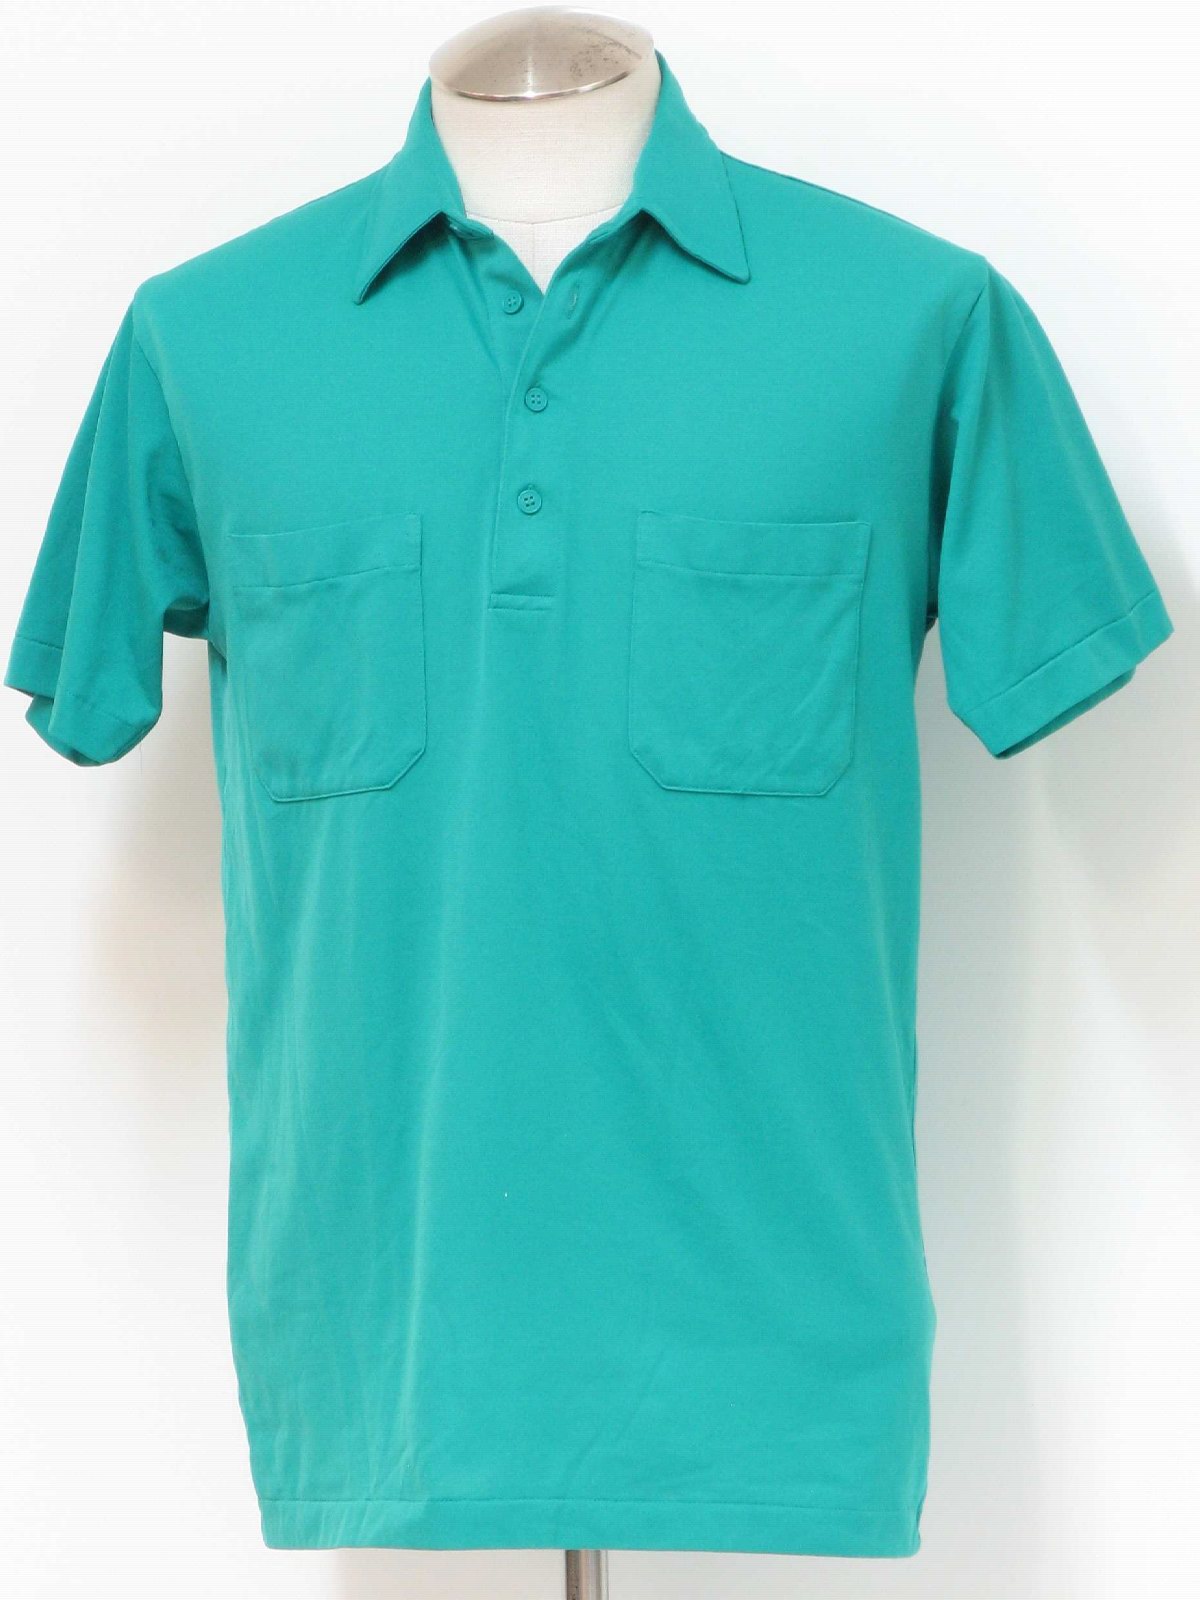 1980s Players Shirt: 80s -Players- Mens teal green short sleeve ...